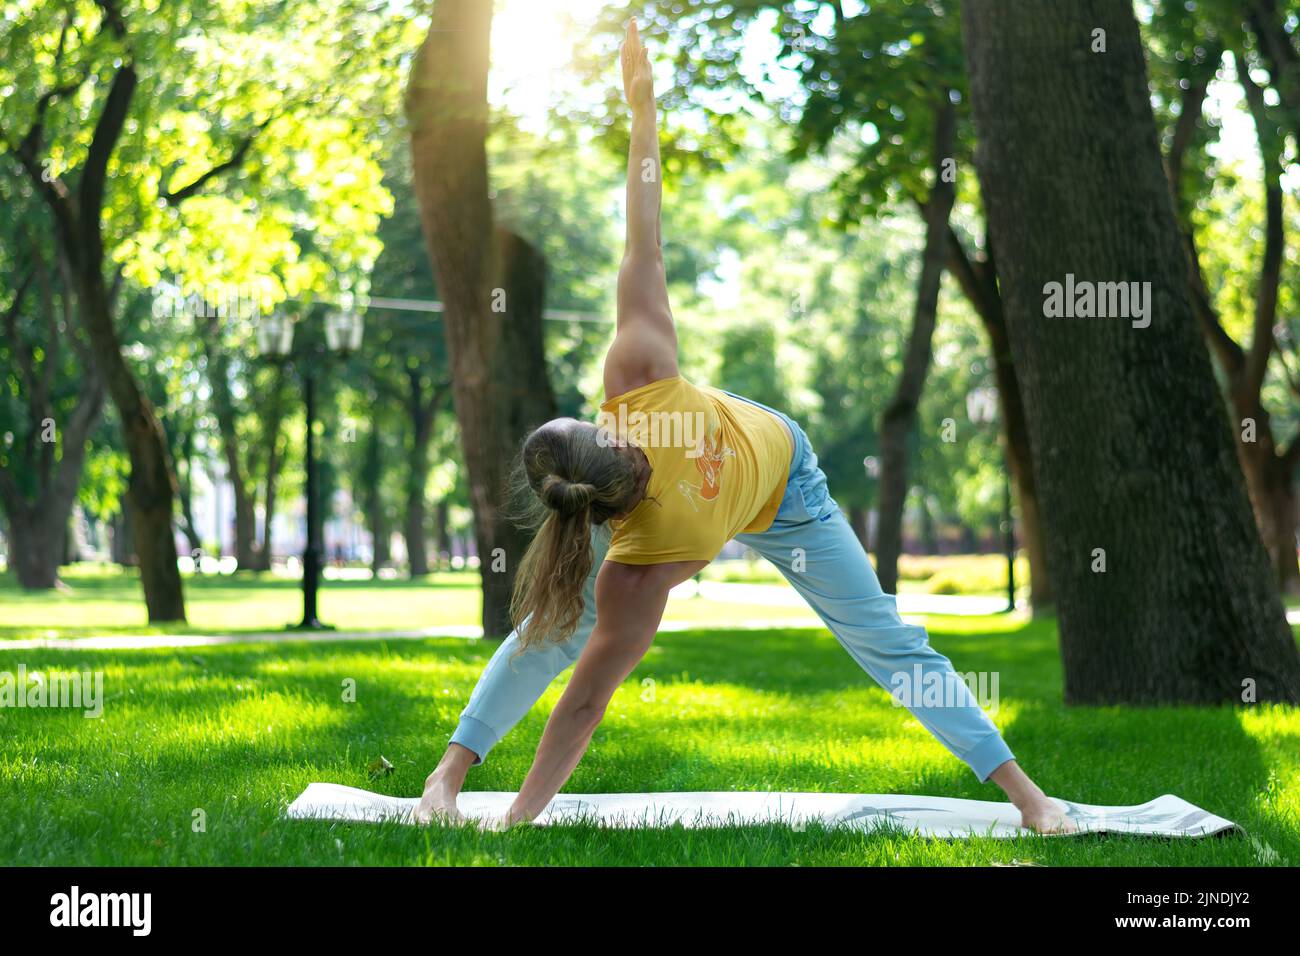 Young man practice yoga in the park. Yoga asanas in city park, sunny day. Concept of meditation, wellbeing and healthy lifestyle Stock Photo